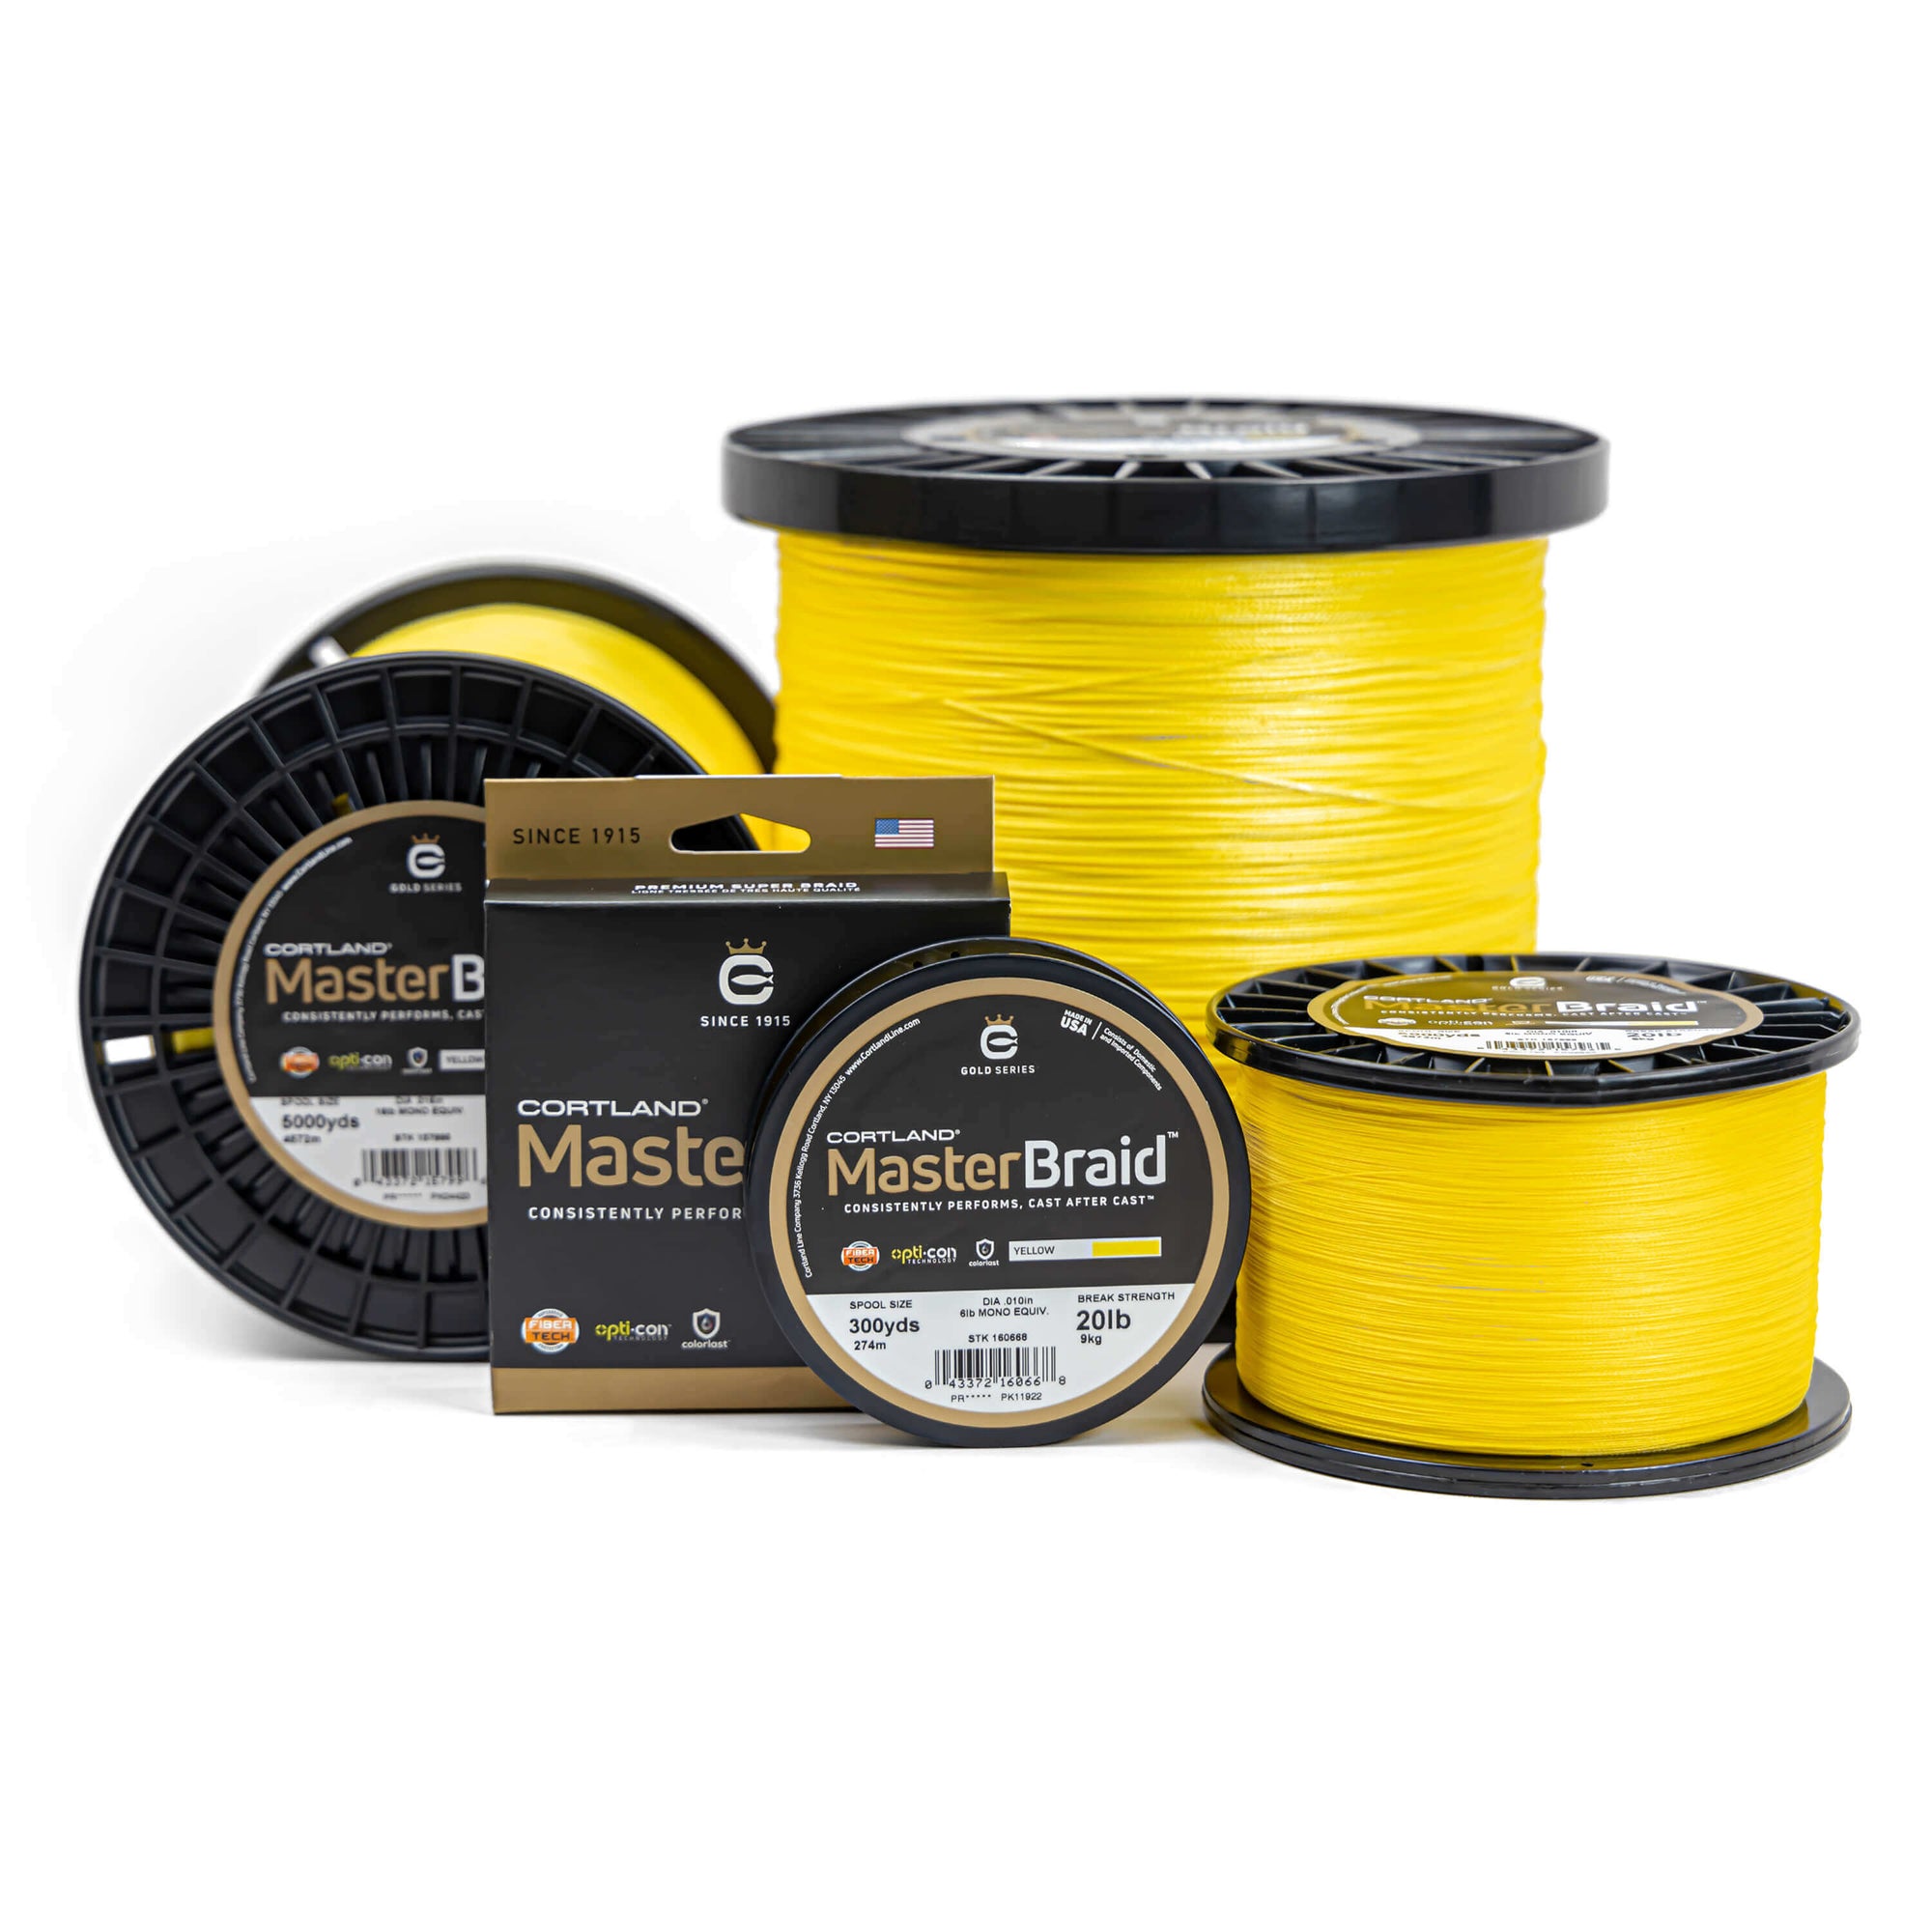 Cortland Master Braid - Yellow fishing line. There is four spools in different sizes and one in a box.